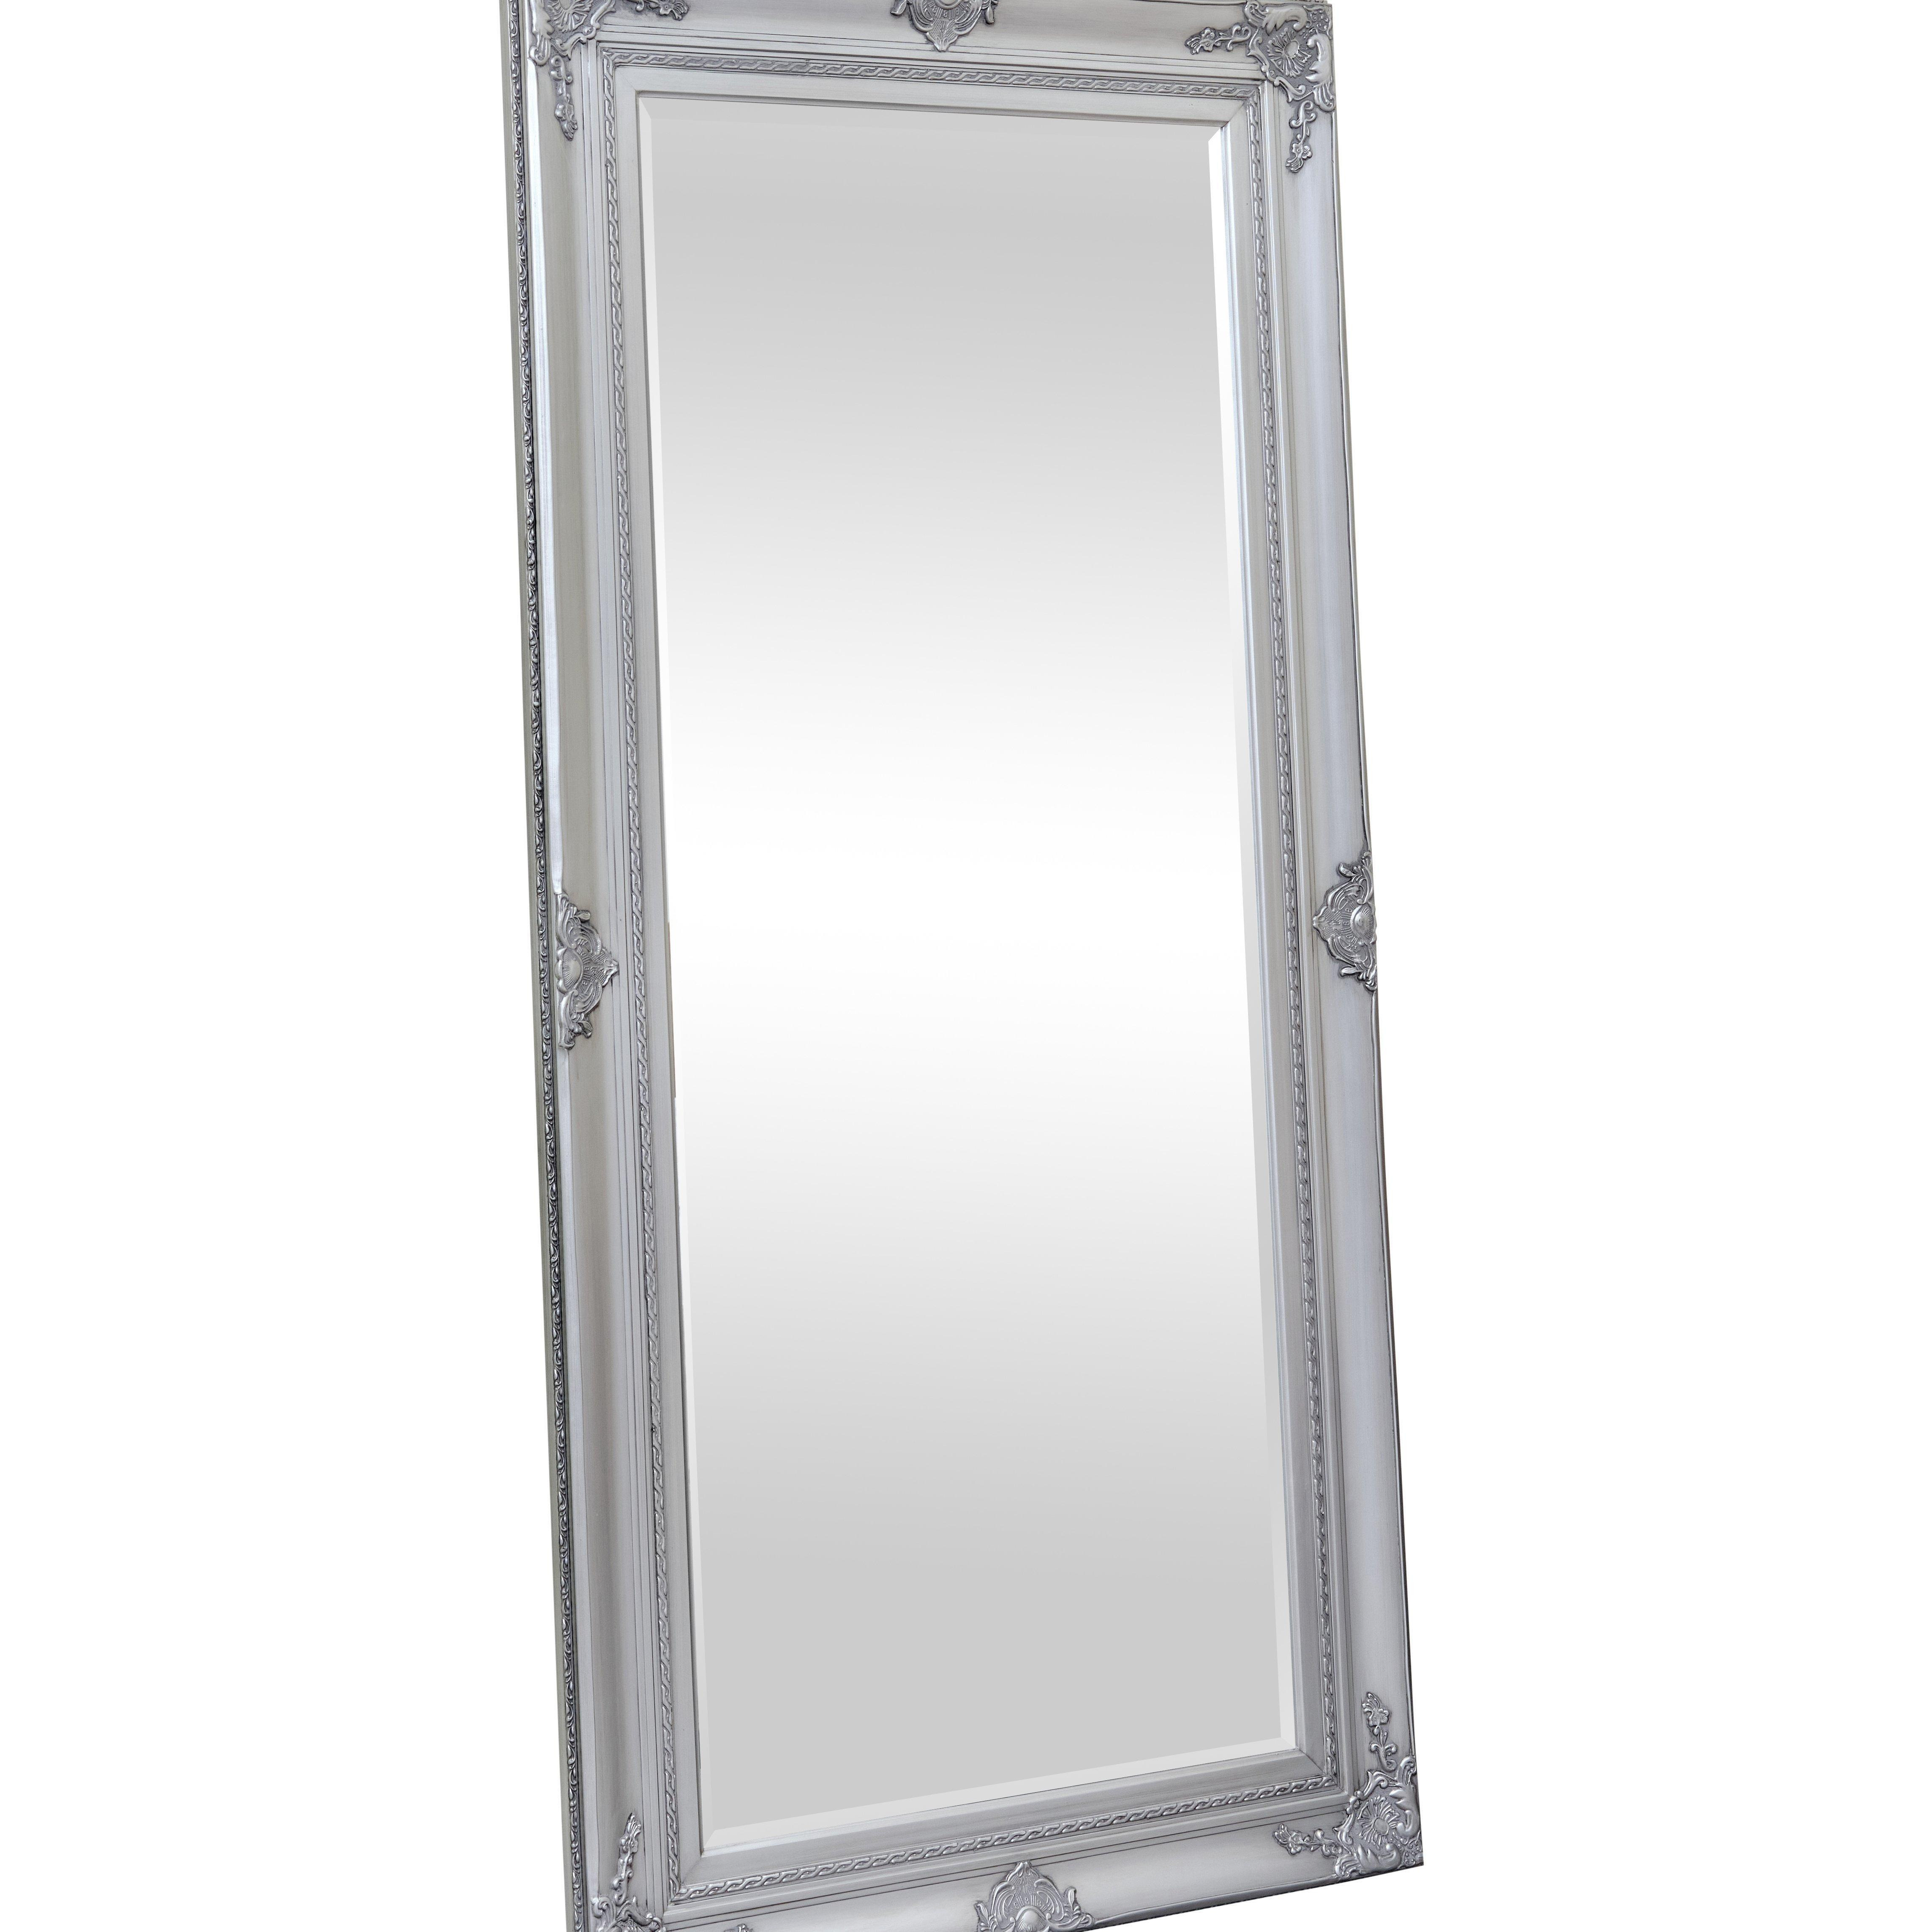 Extra Large Ornate Silver Wall / Floor / Leaner Full Length Mirror 100cm X 200cm - image 1